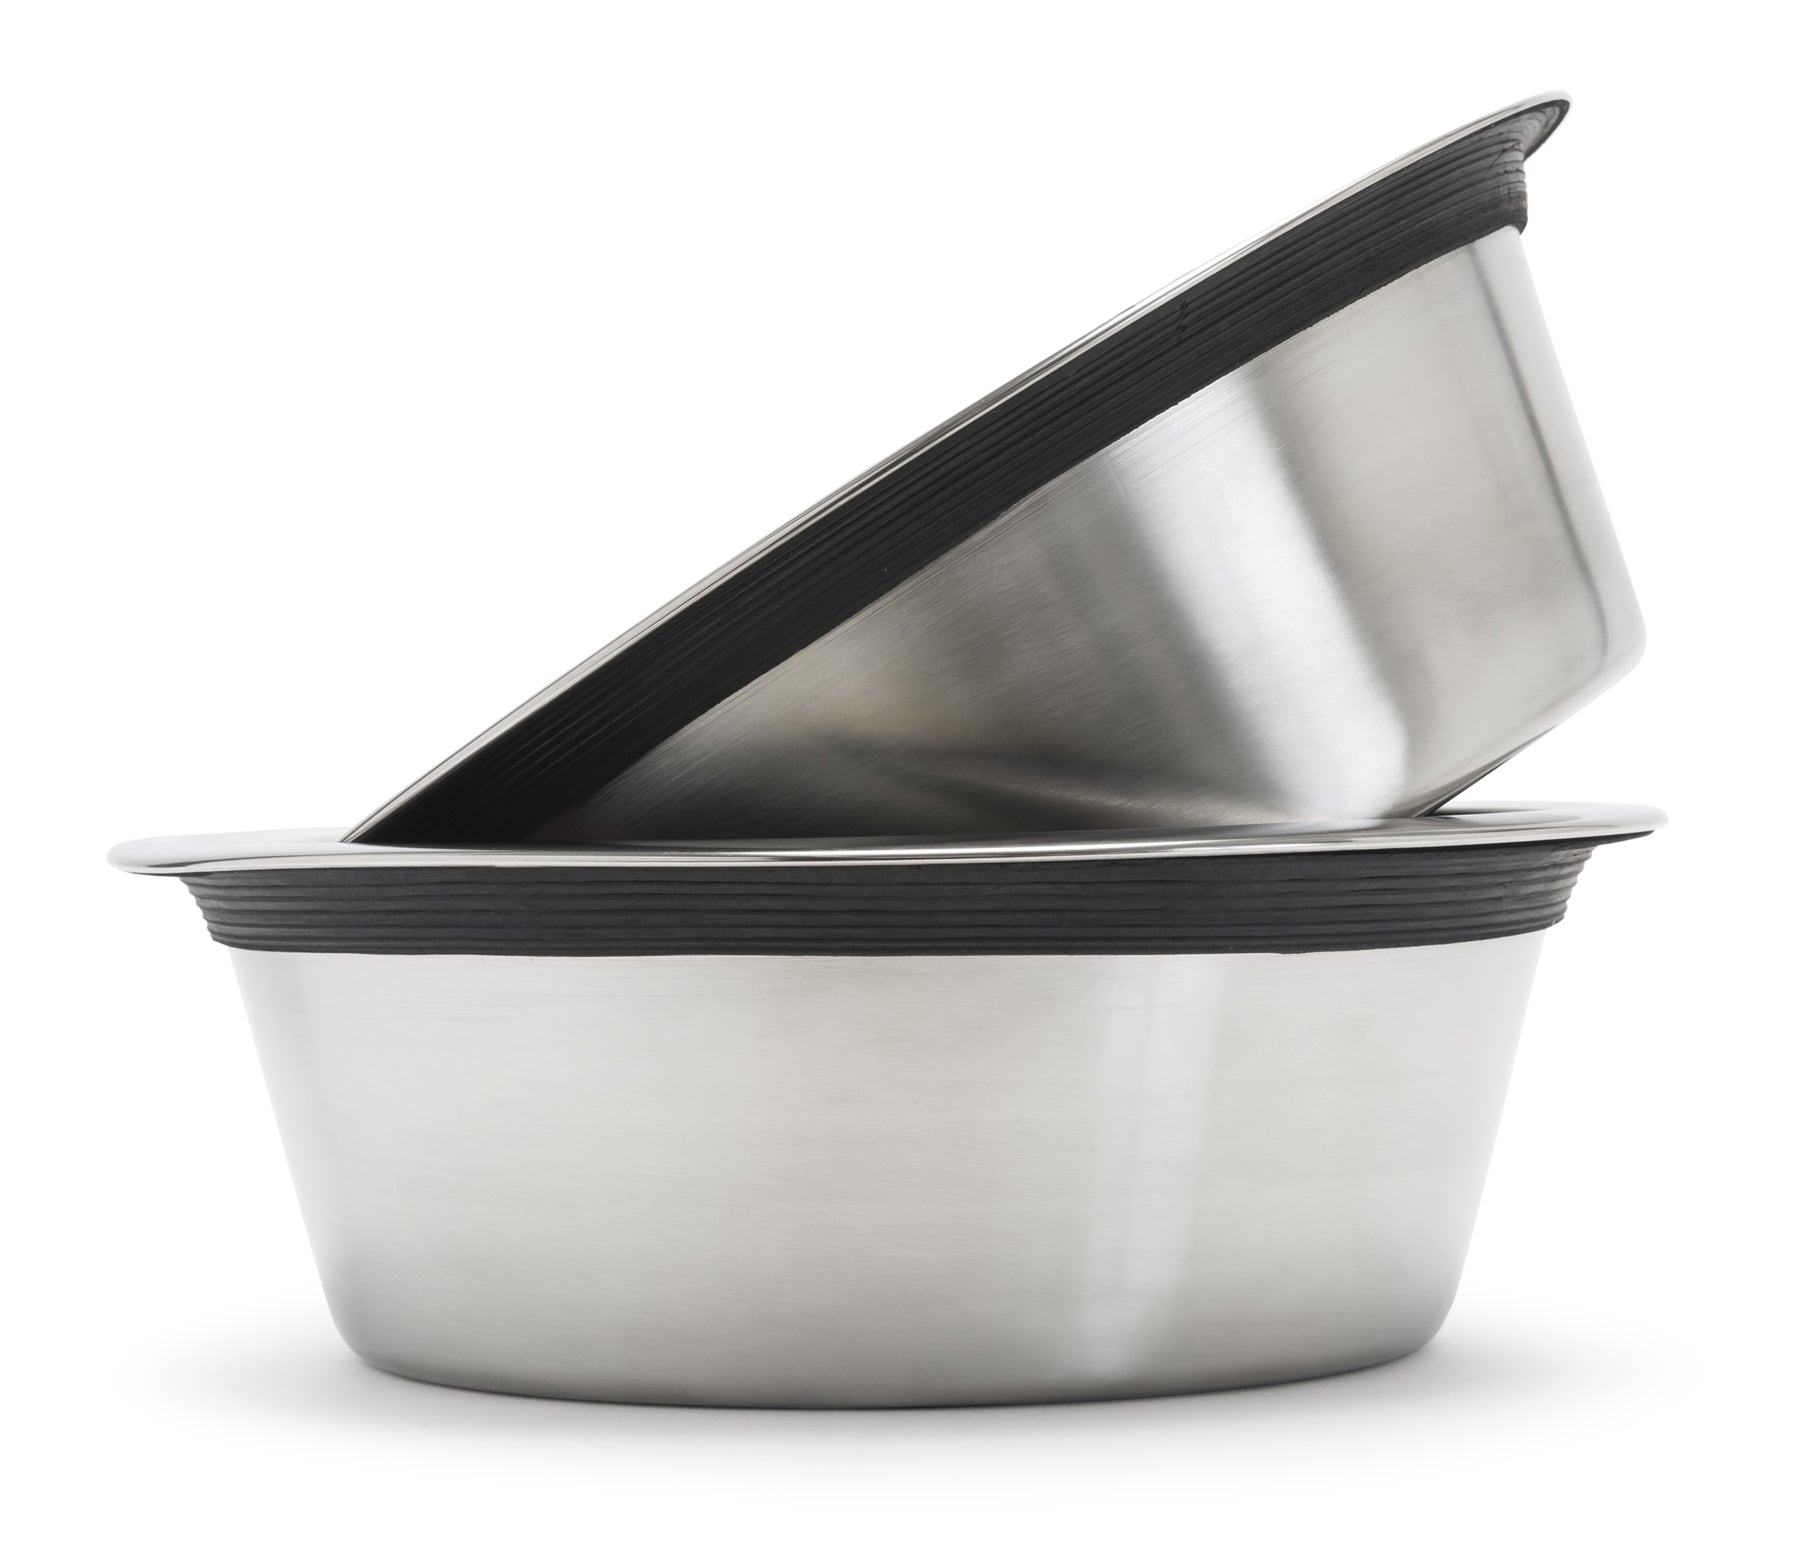 Yamazaki Home Dog Bowls & Stand for Pets, 2 Colors, Steel on Food52